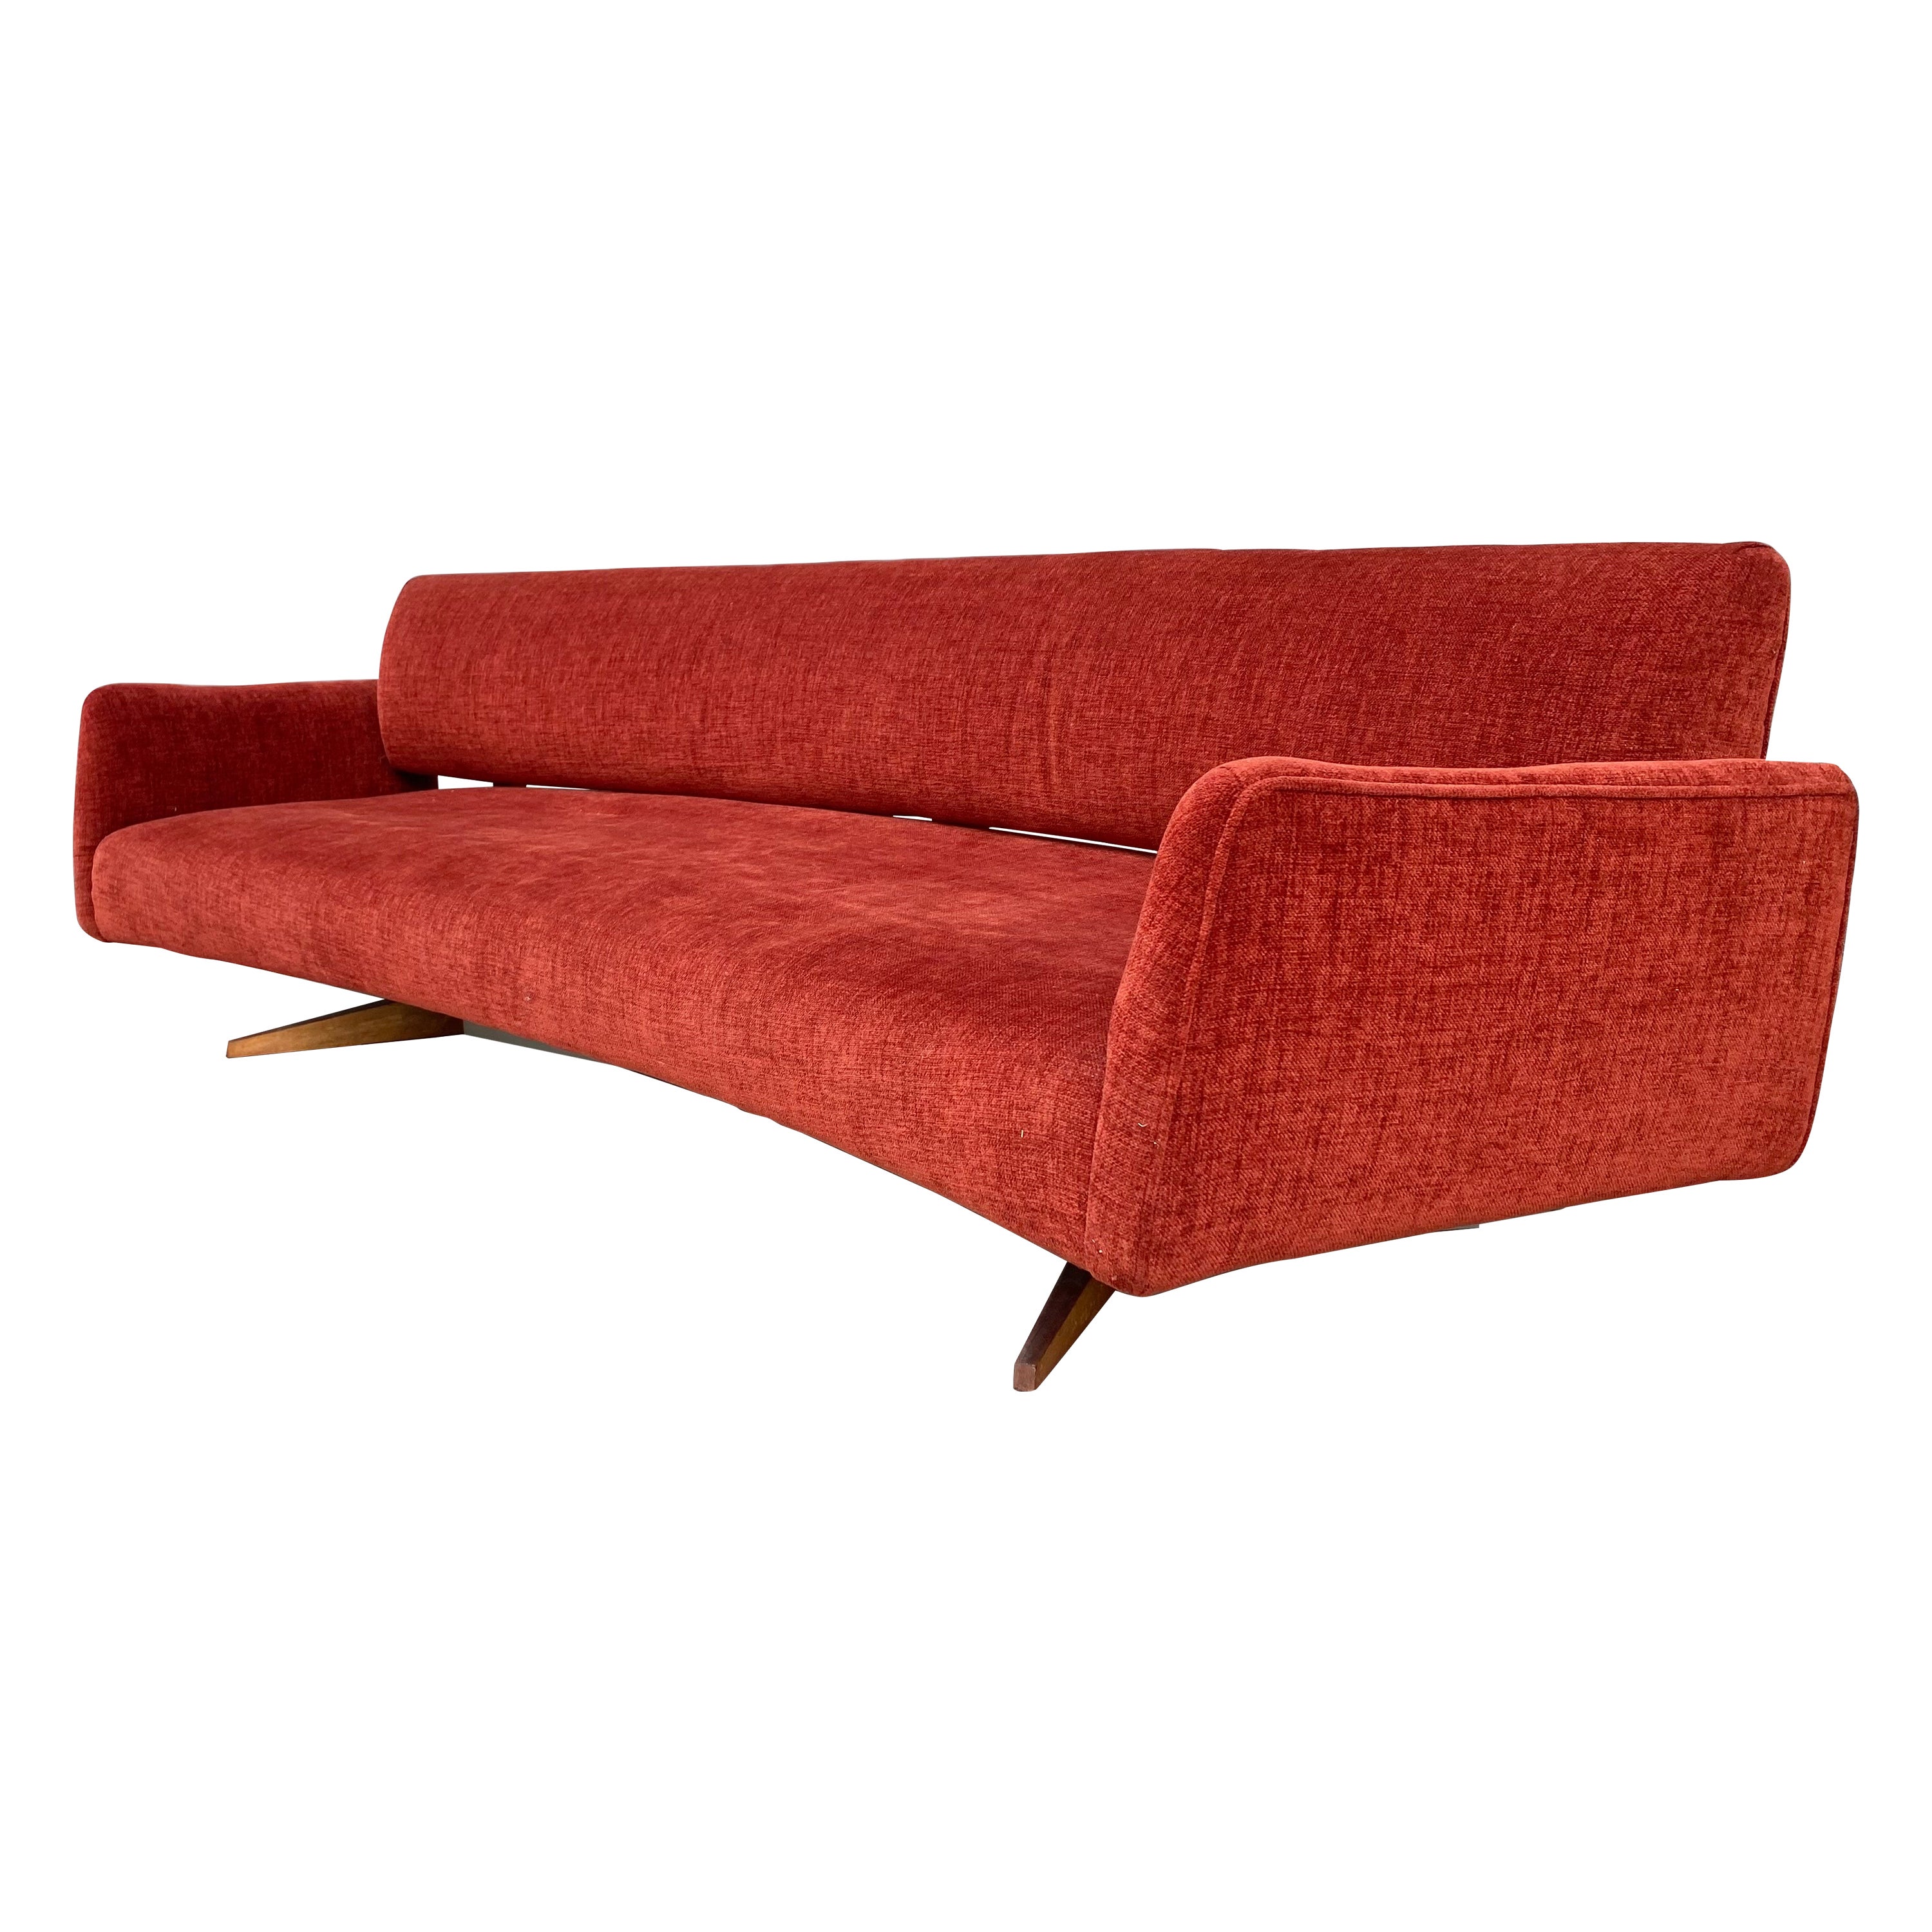 Stunning Mid Century Modern Sofa attributed to Jens Risom For Sale